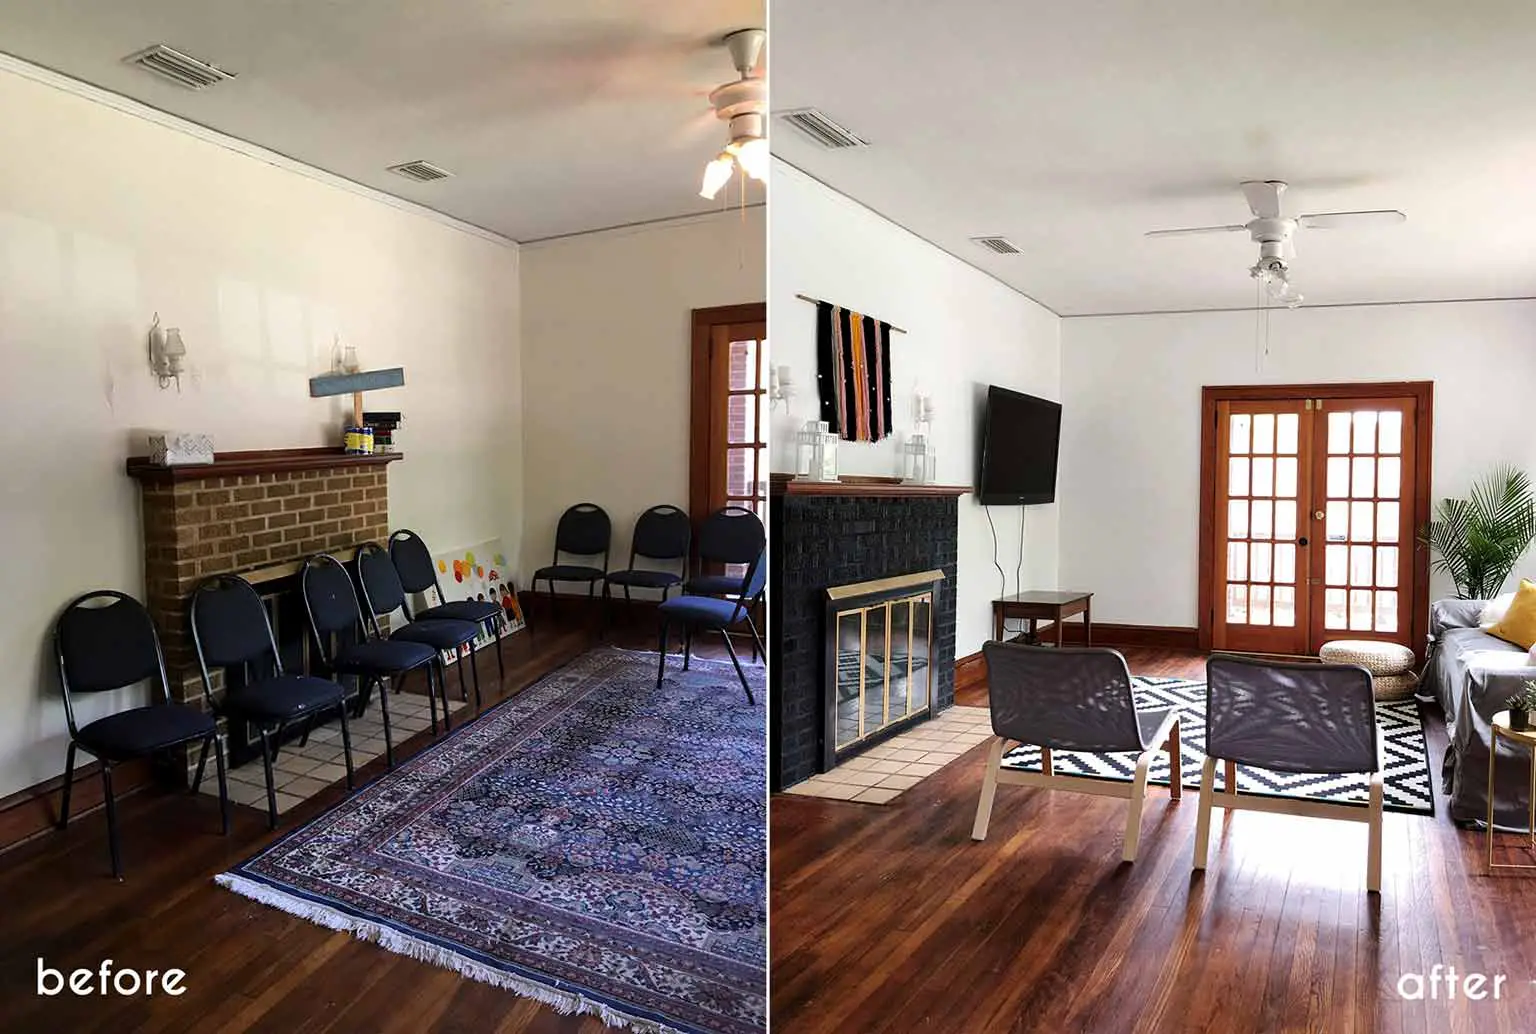 Before and after - Modern minimalist room makeover on a budget - That Homebird Life Blog